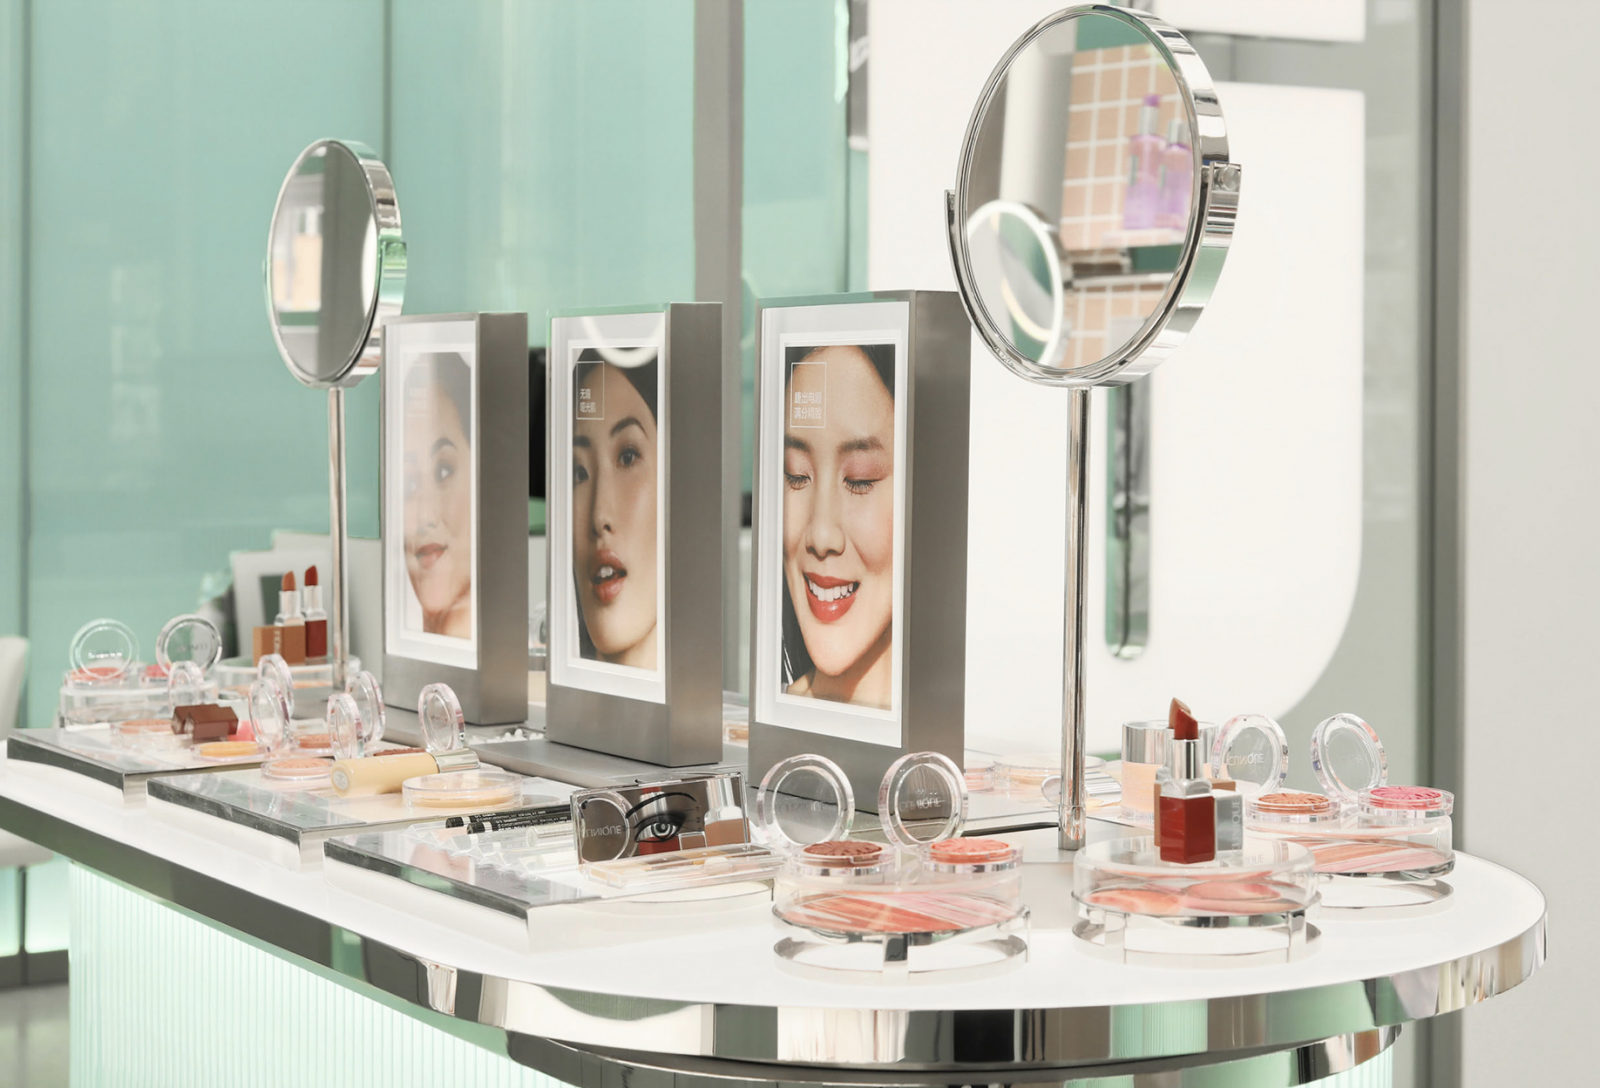 A beauty counter at a retail store